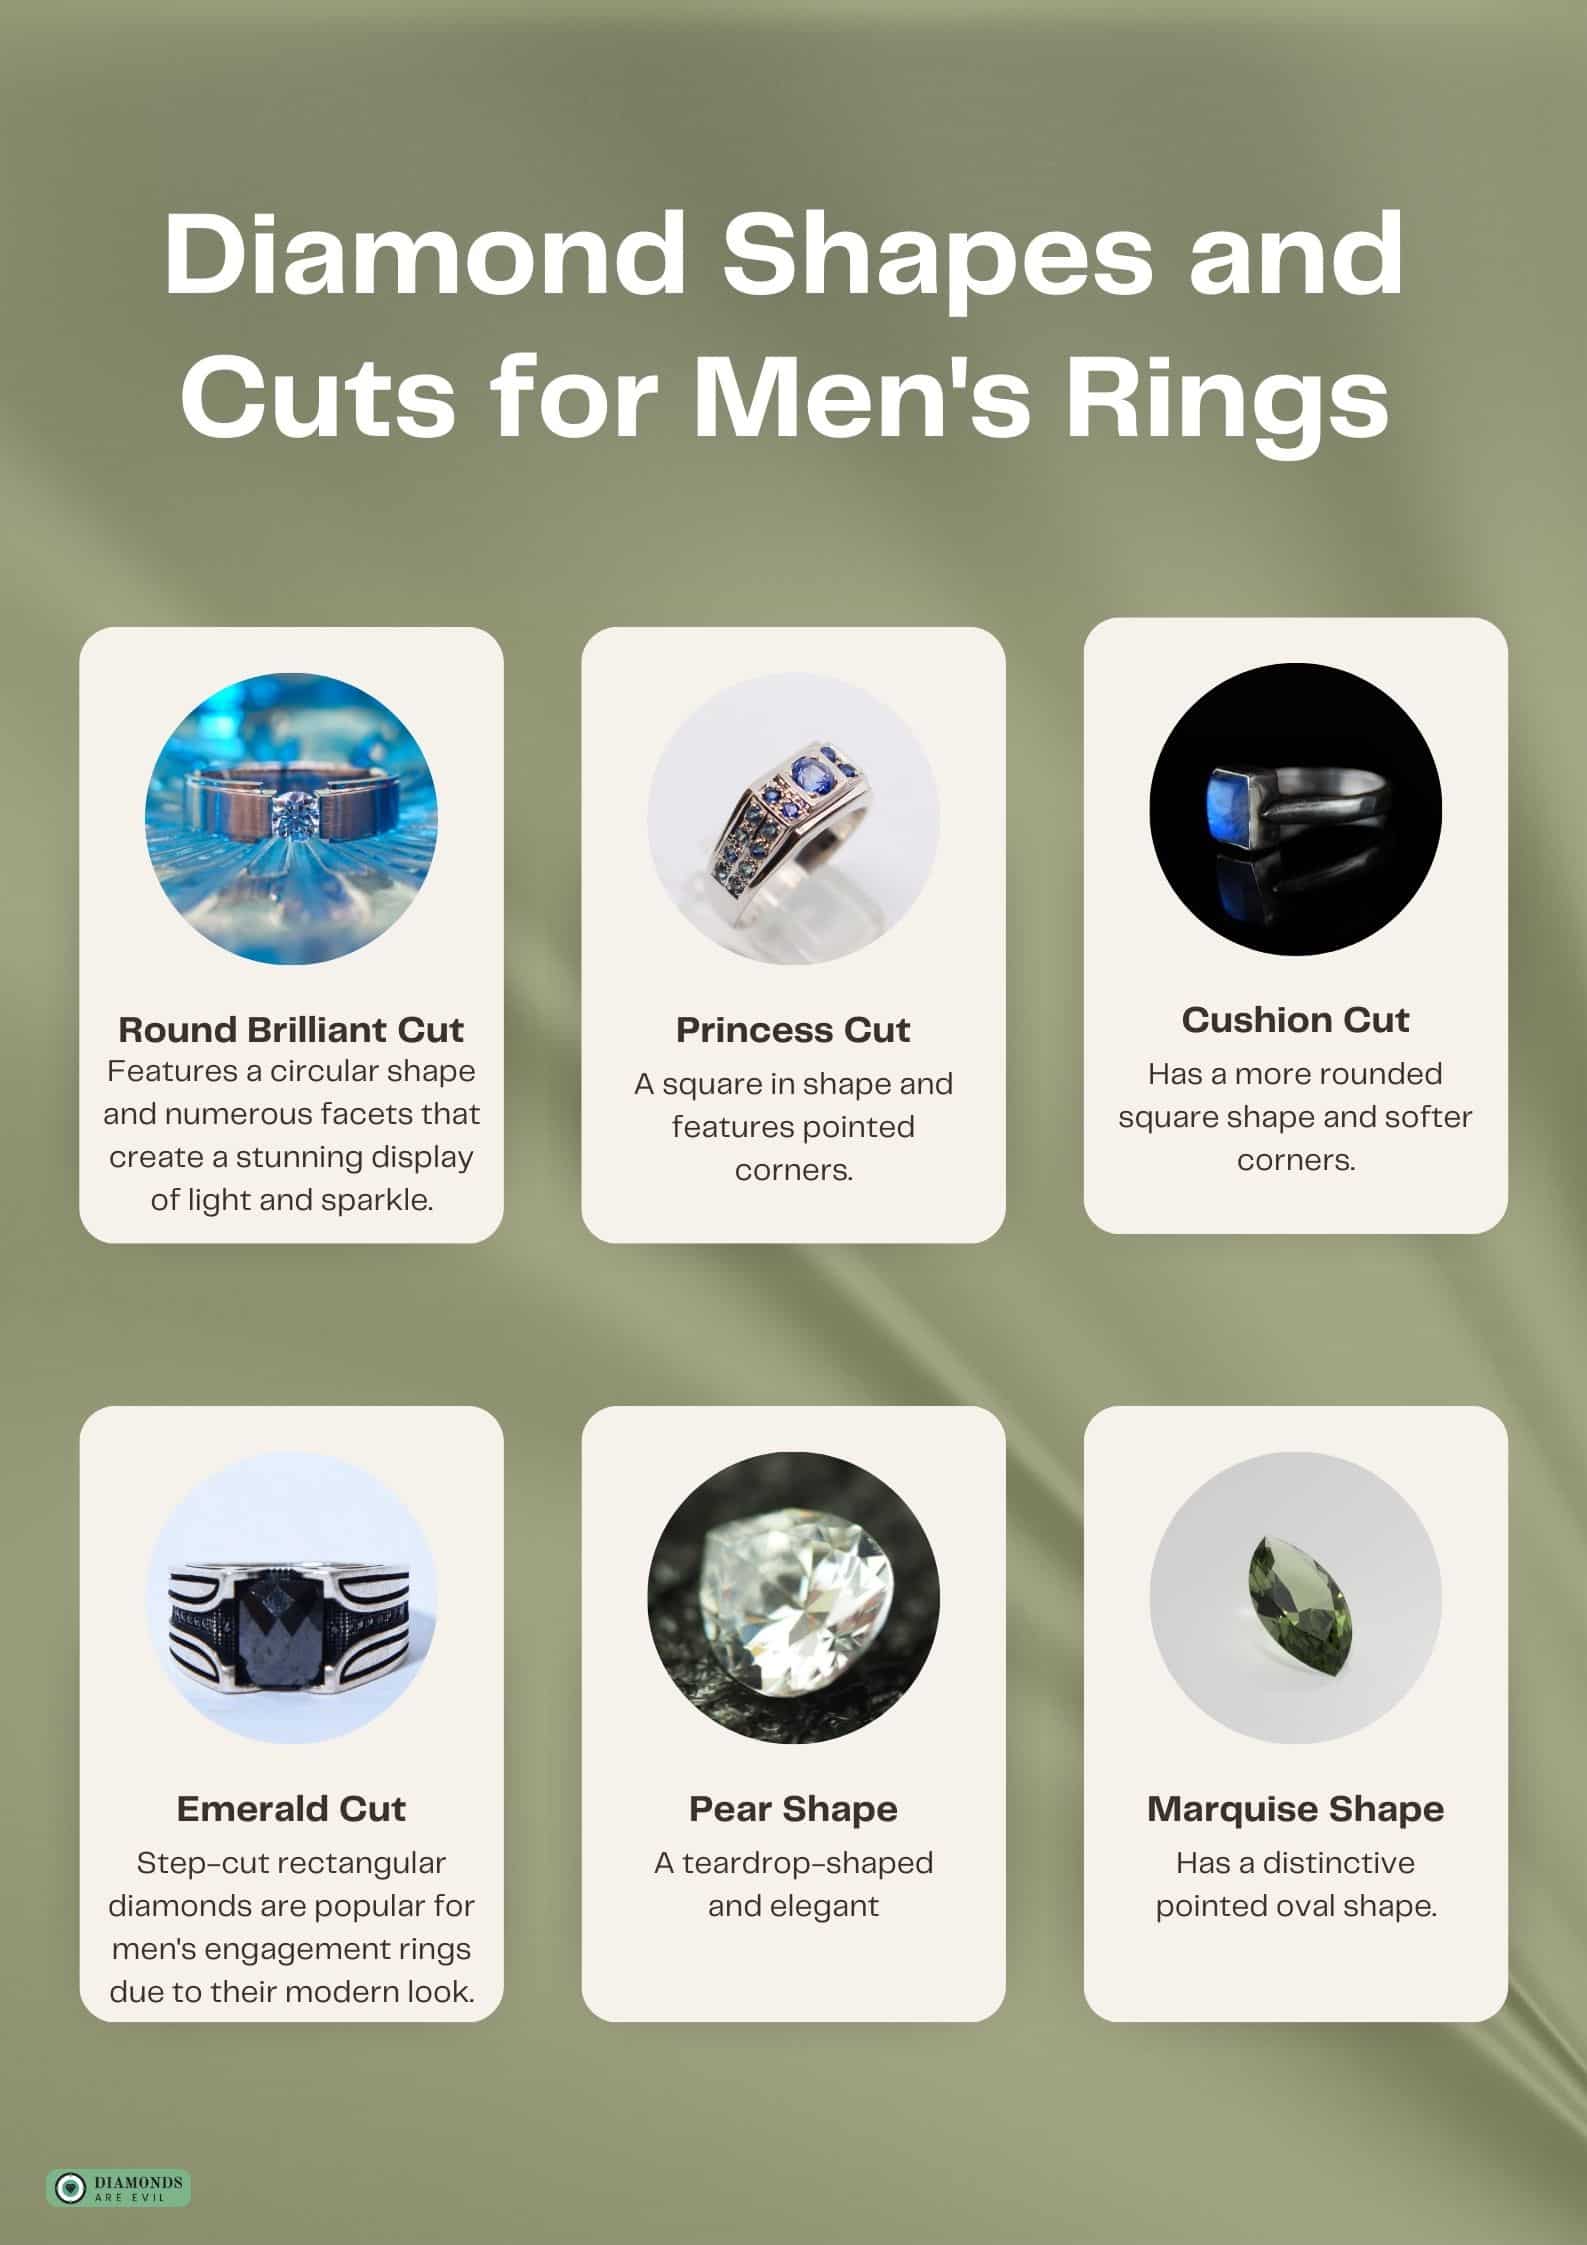 Diamond Shapes and Cuts for Men's Rings